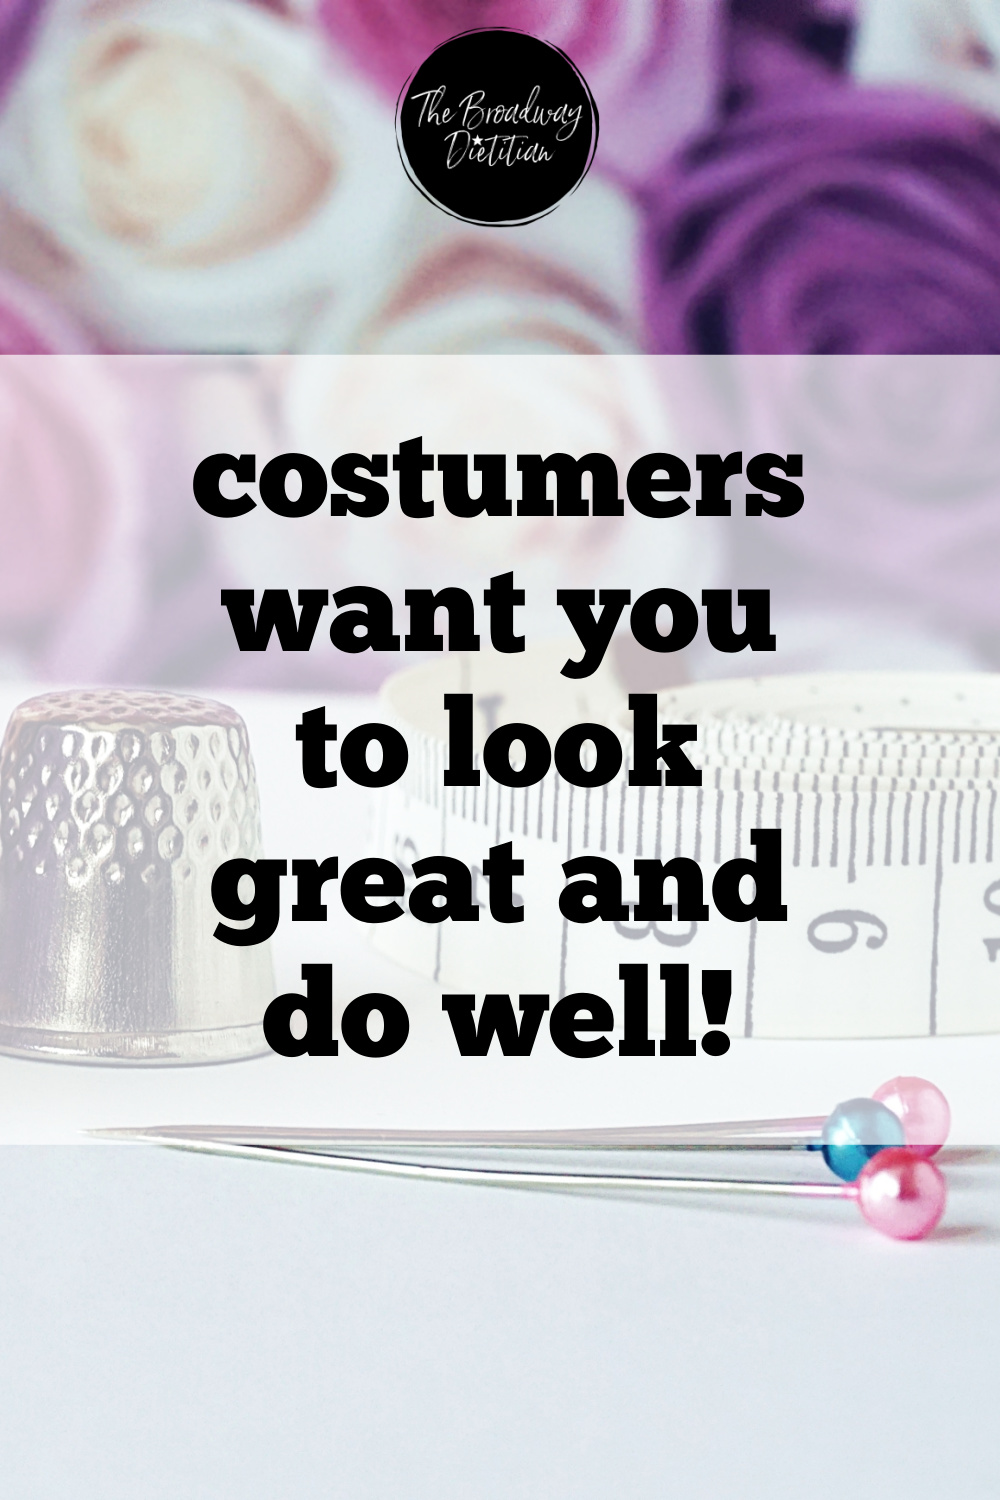 costumers want you to look great and do well